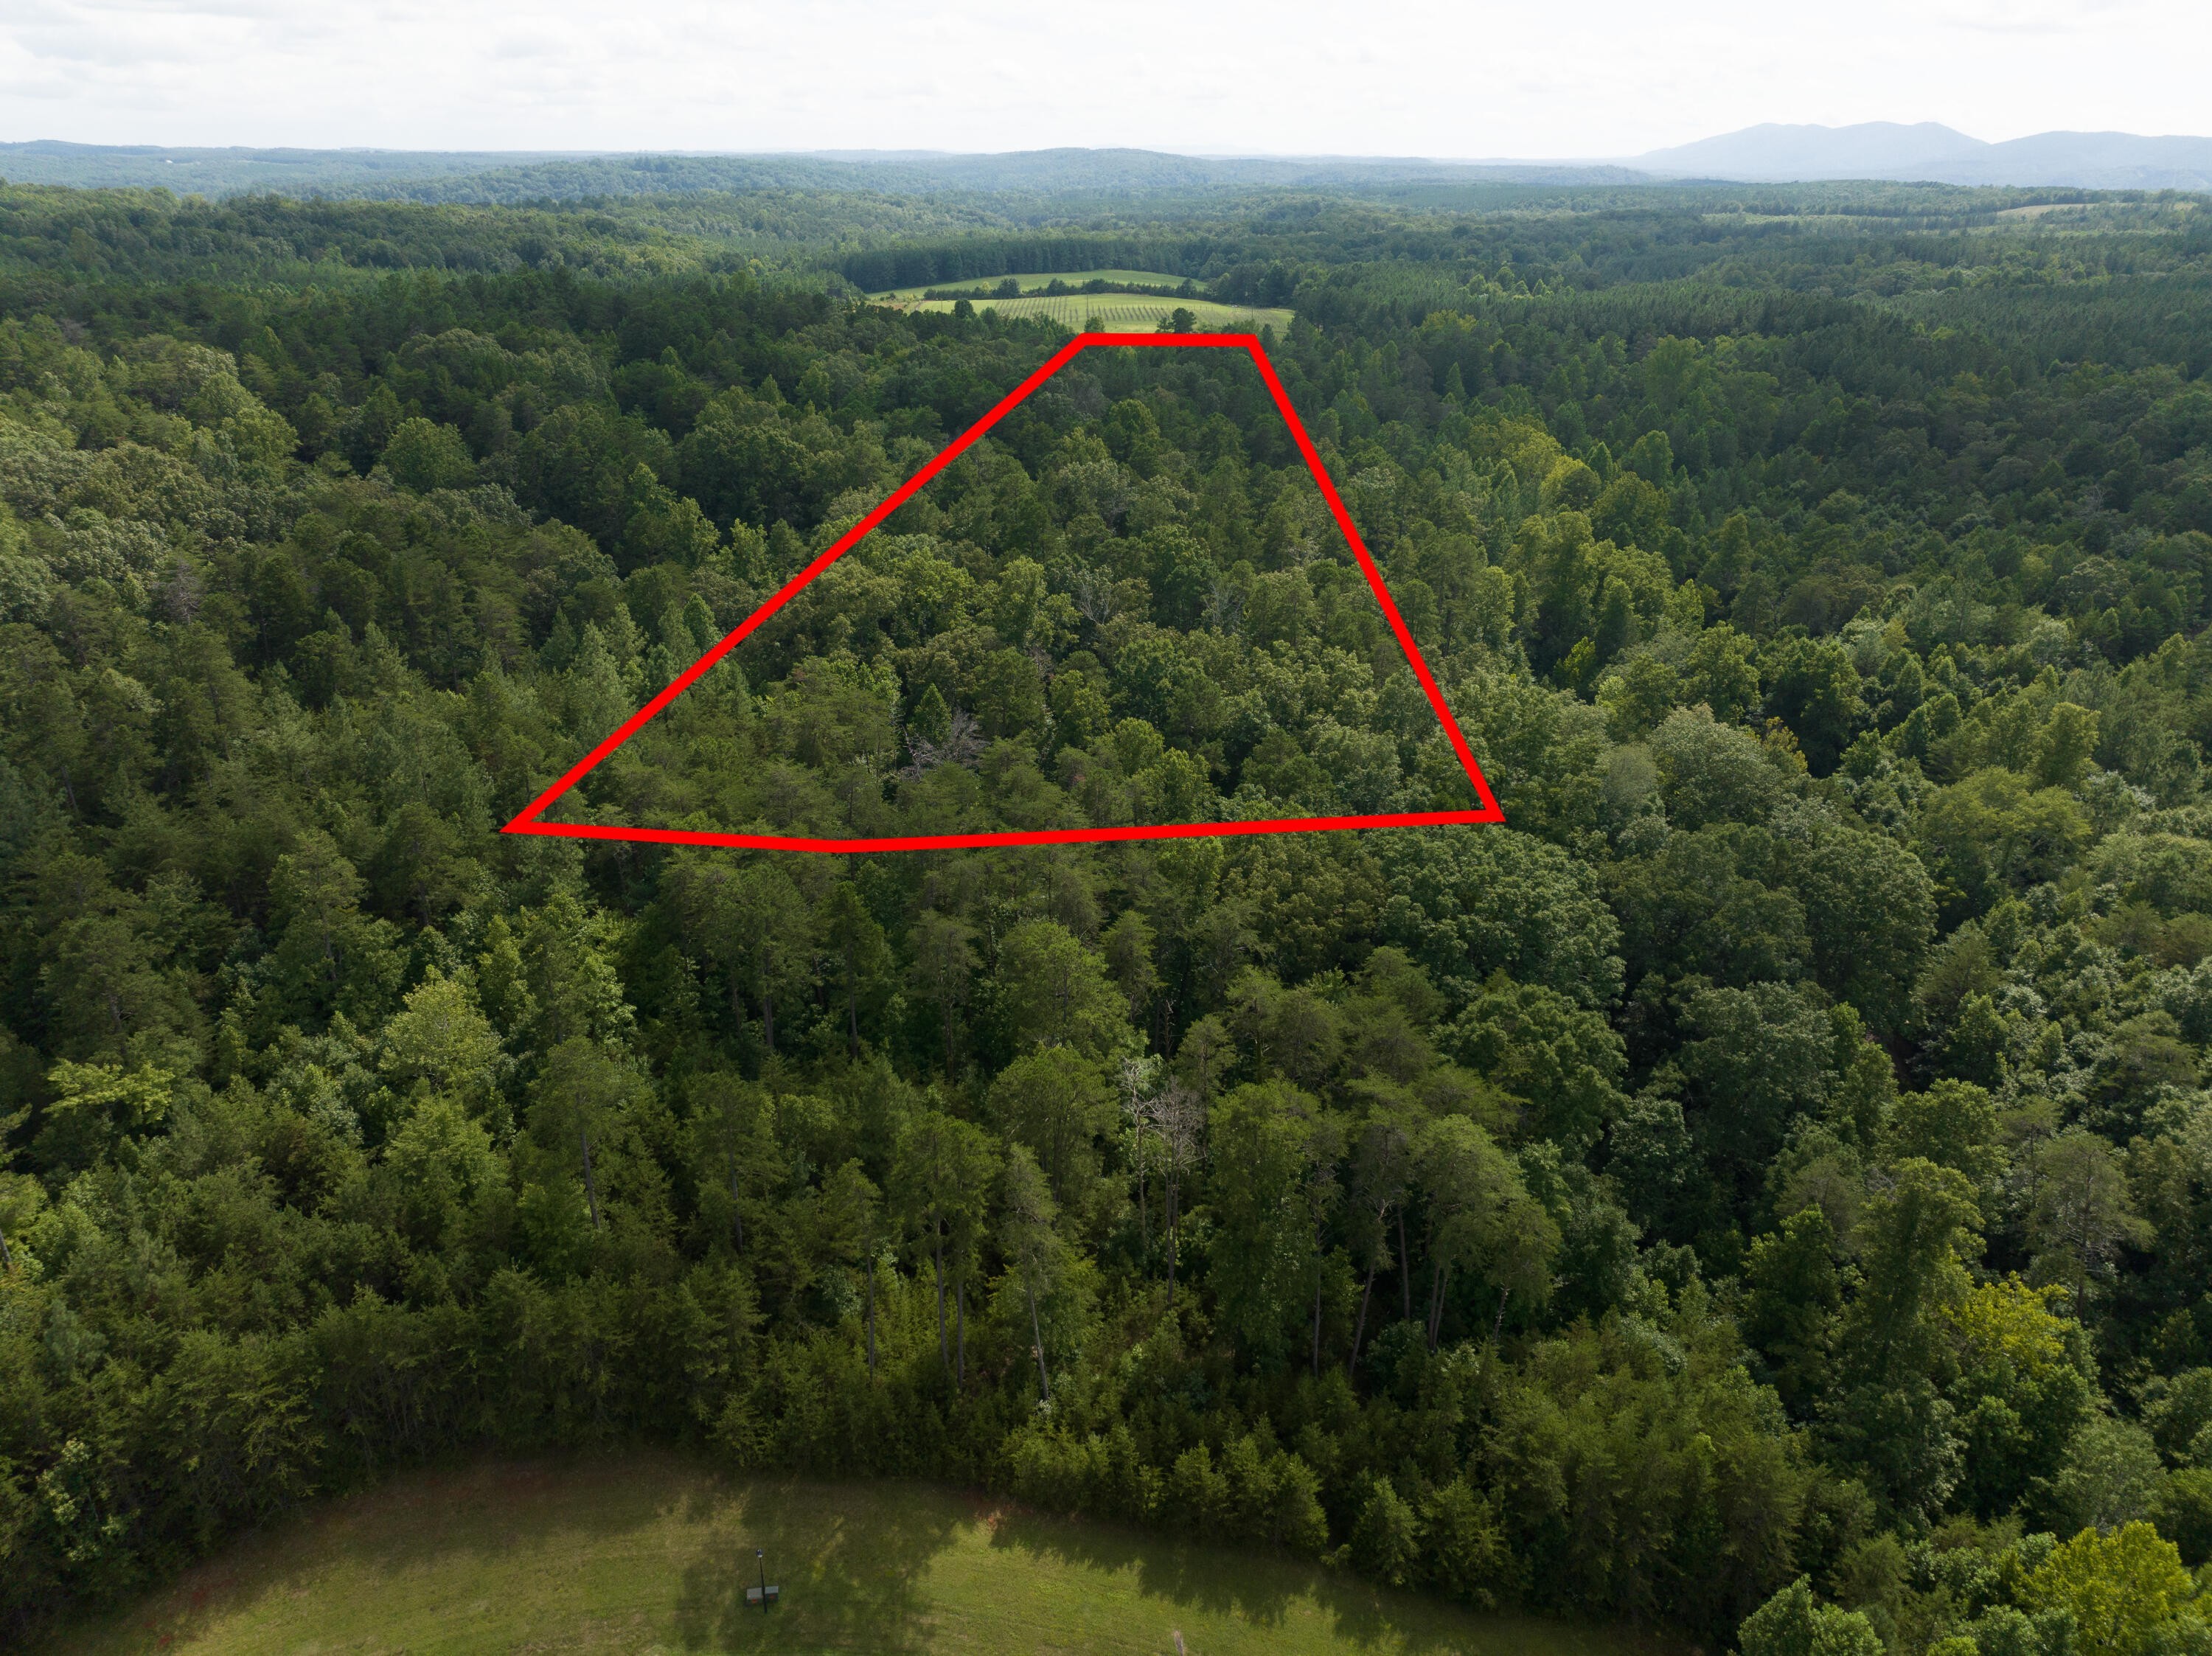 2. Lot 369 Mt Airy Rd